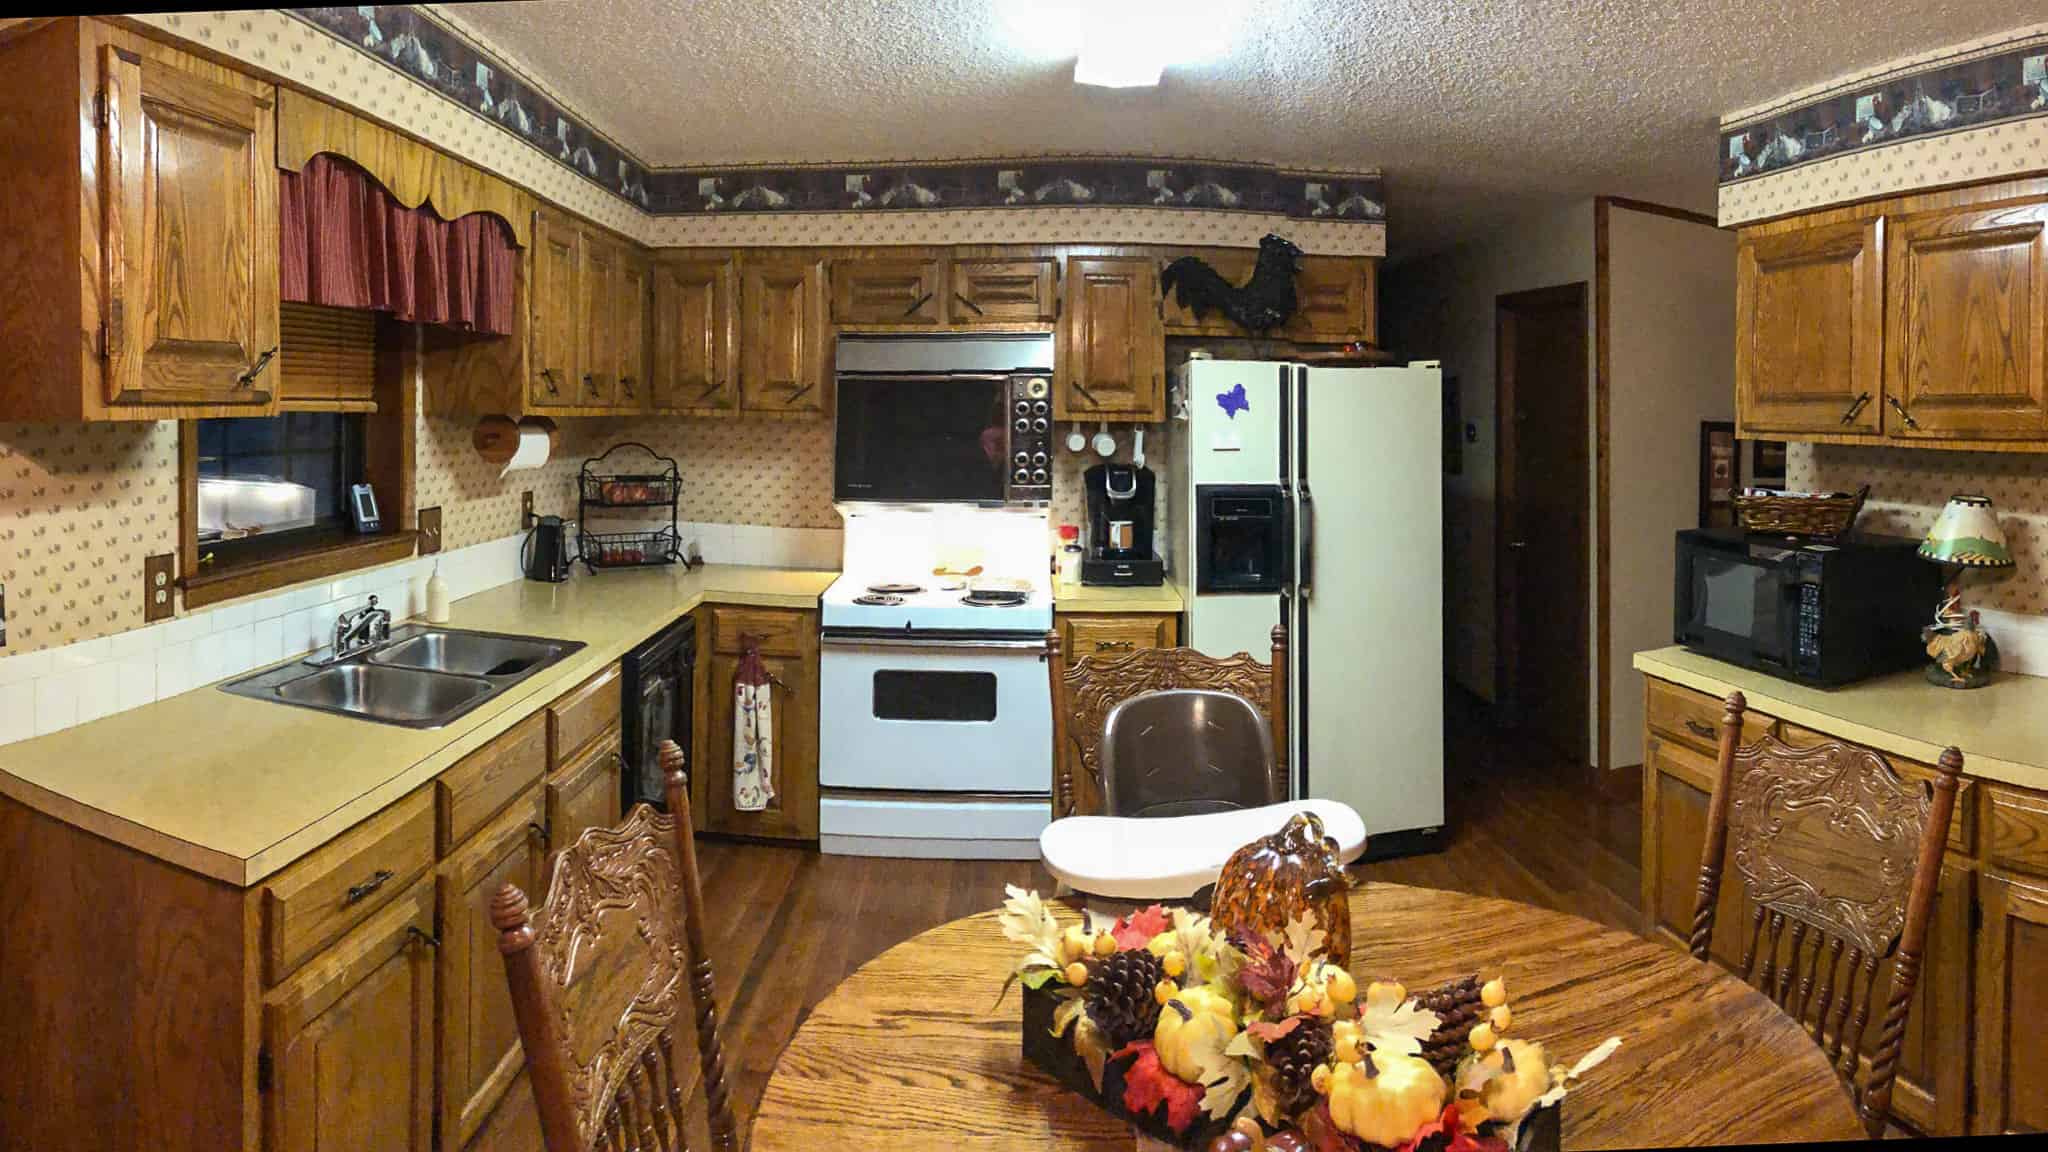 Huge before and after kitchen remodel photos!